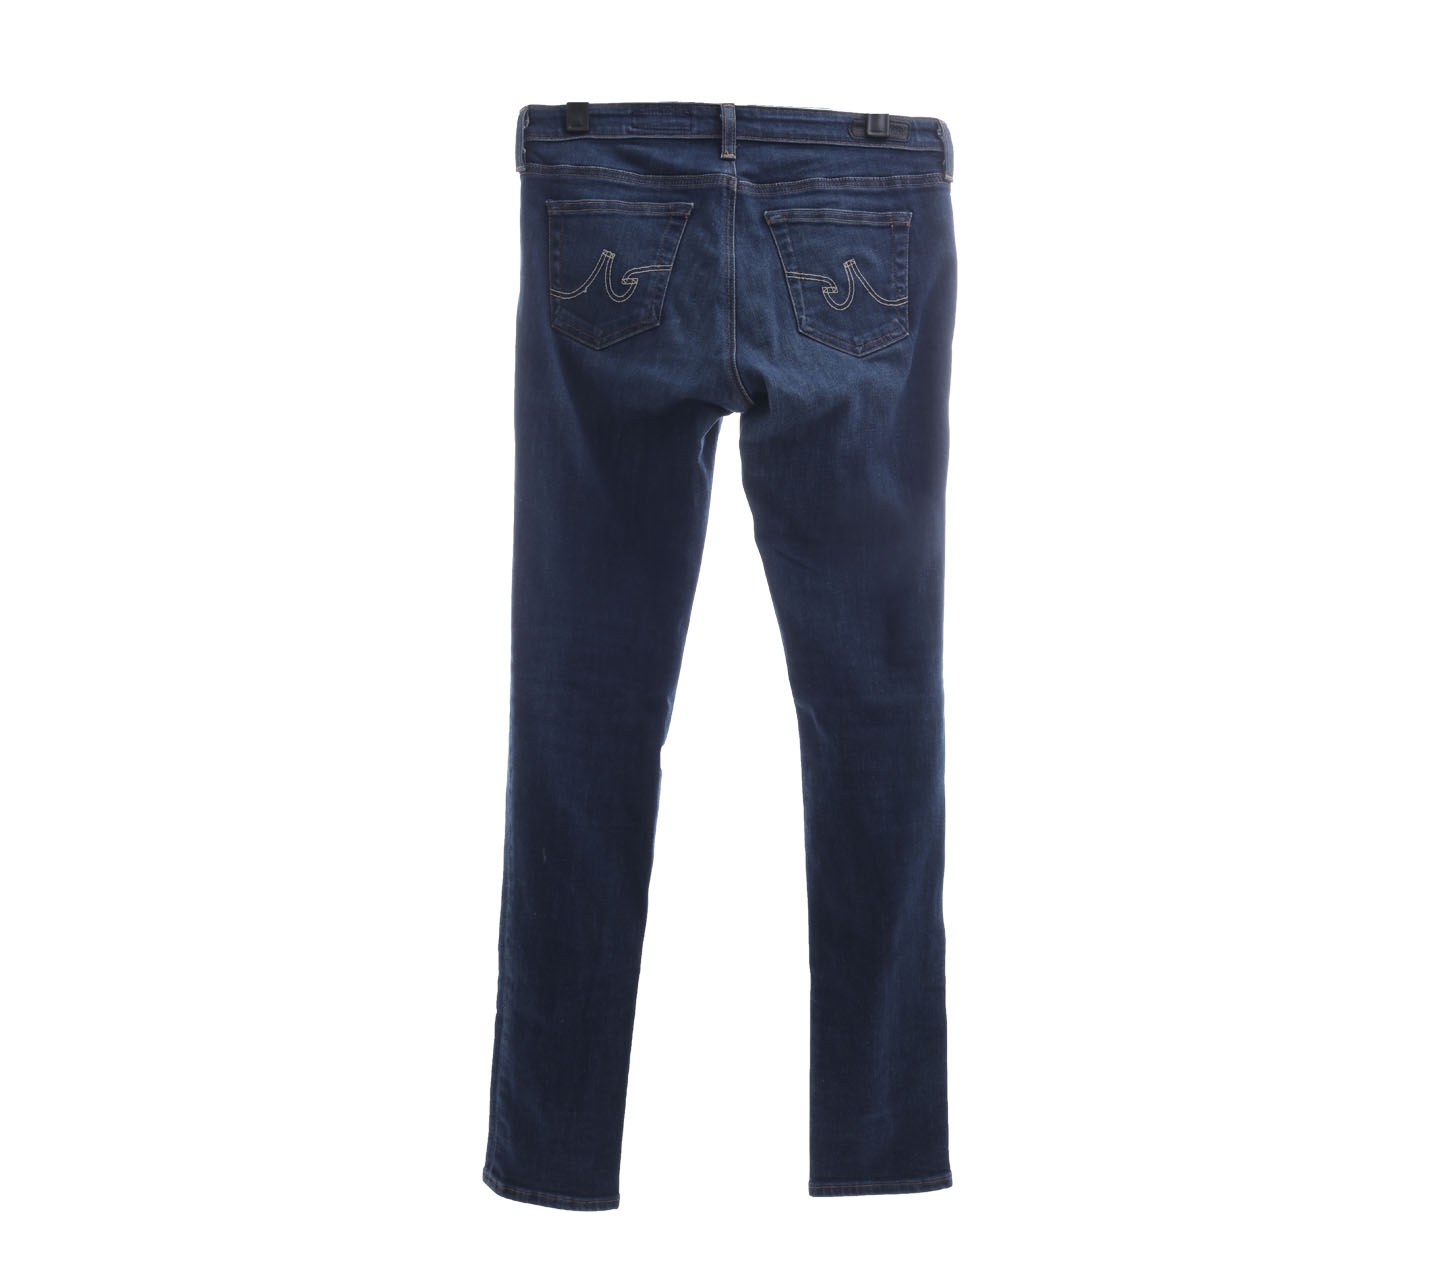 Adriano Goldschmied Dark Blue Washed Trousers